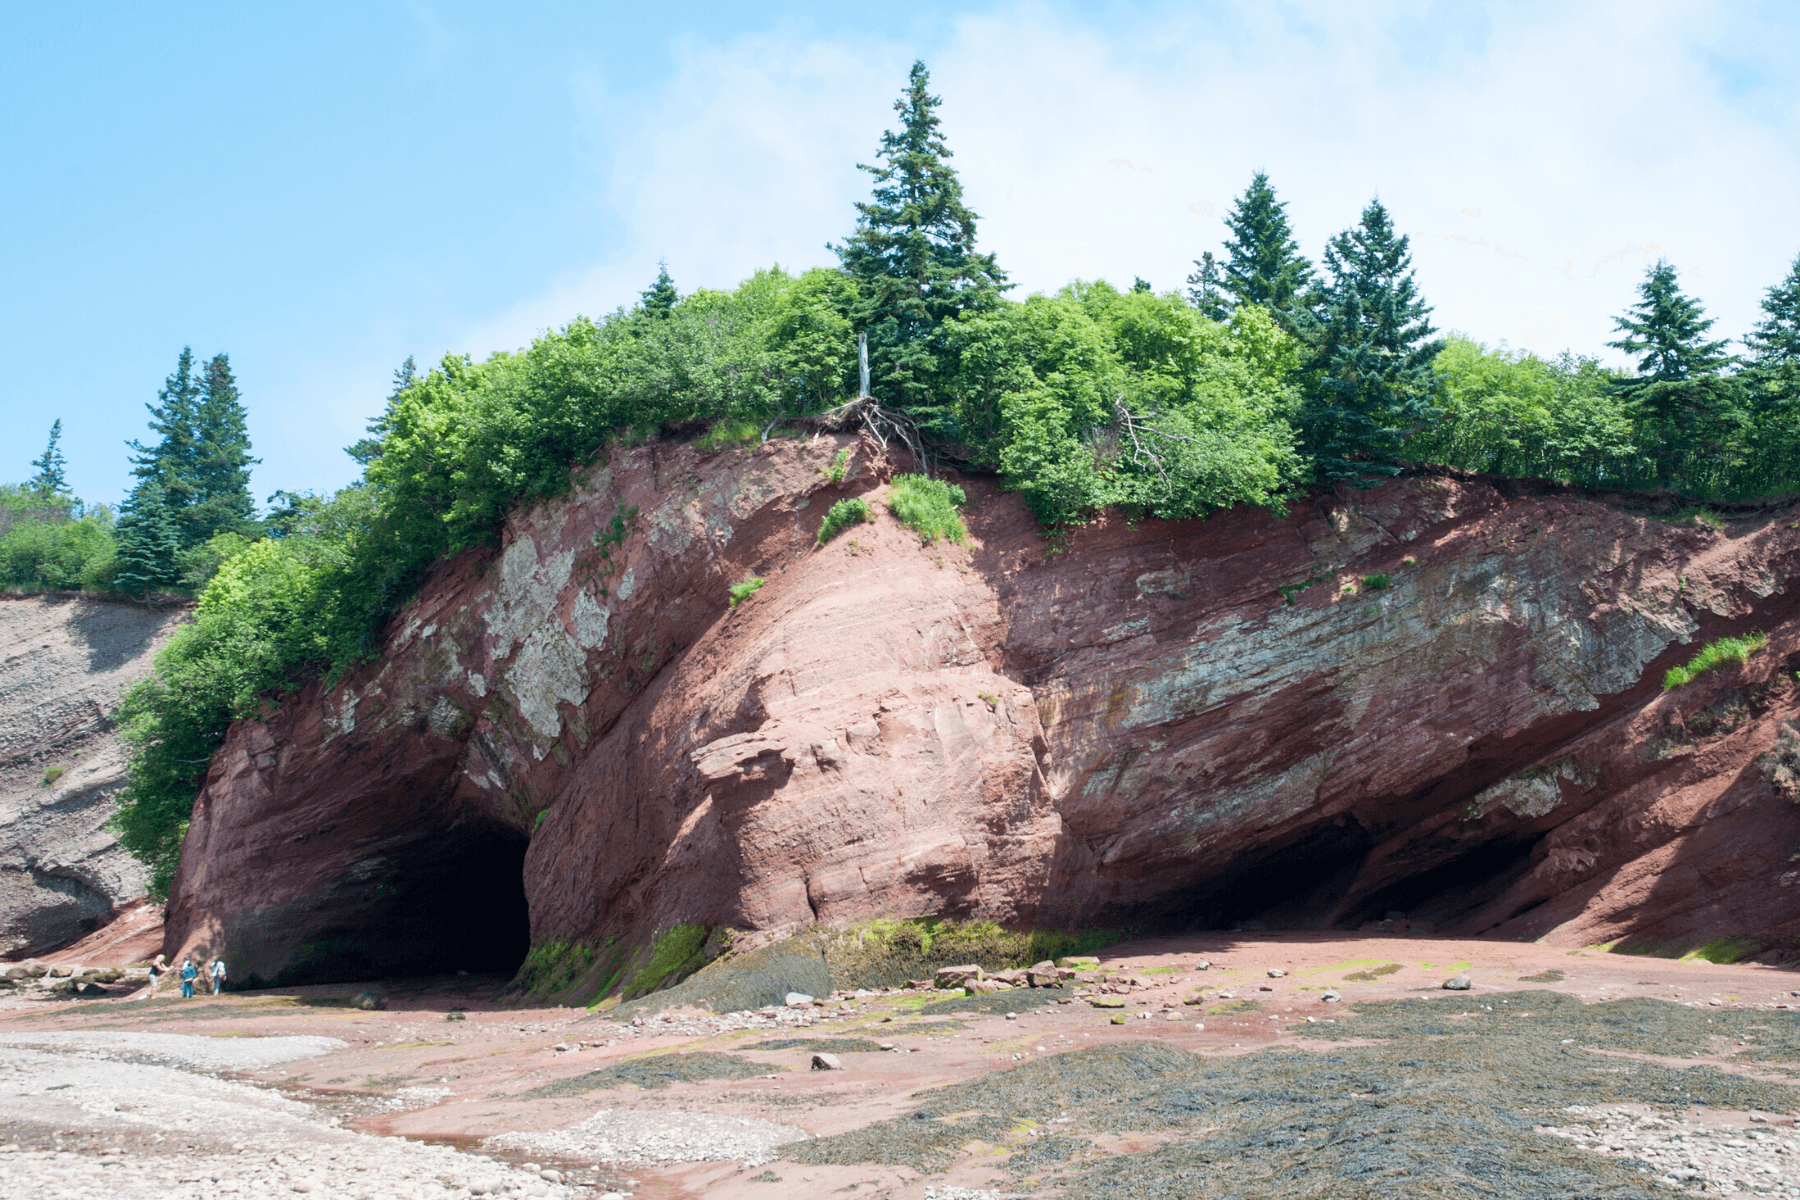 https://res.cloudinary.com/see-sight-tours/image/upload/v1581432155/Bay-of-Fundy-National-Park.png